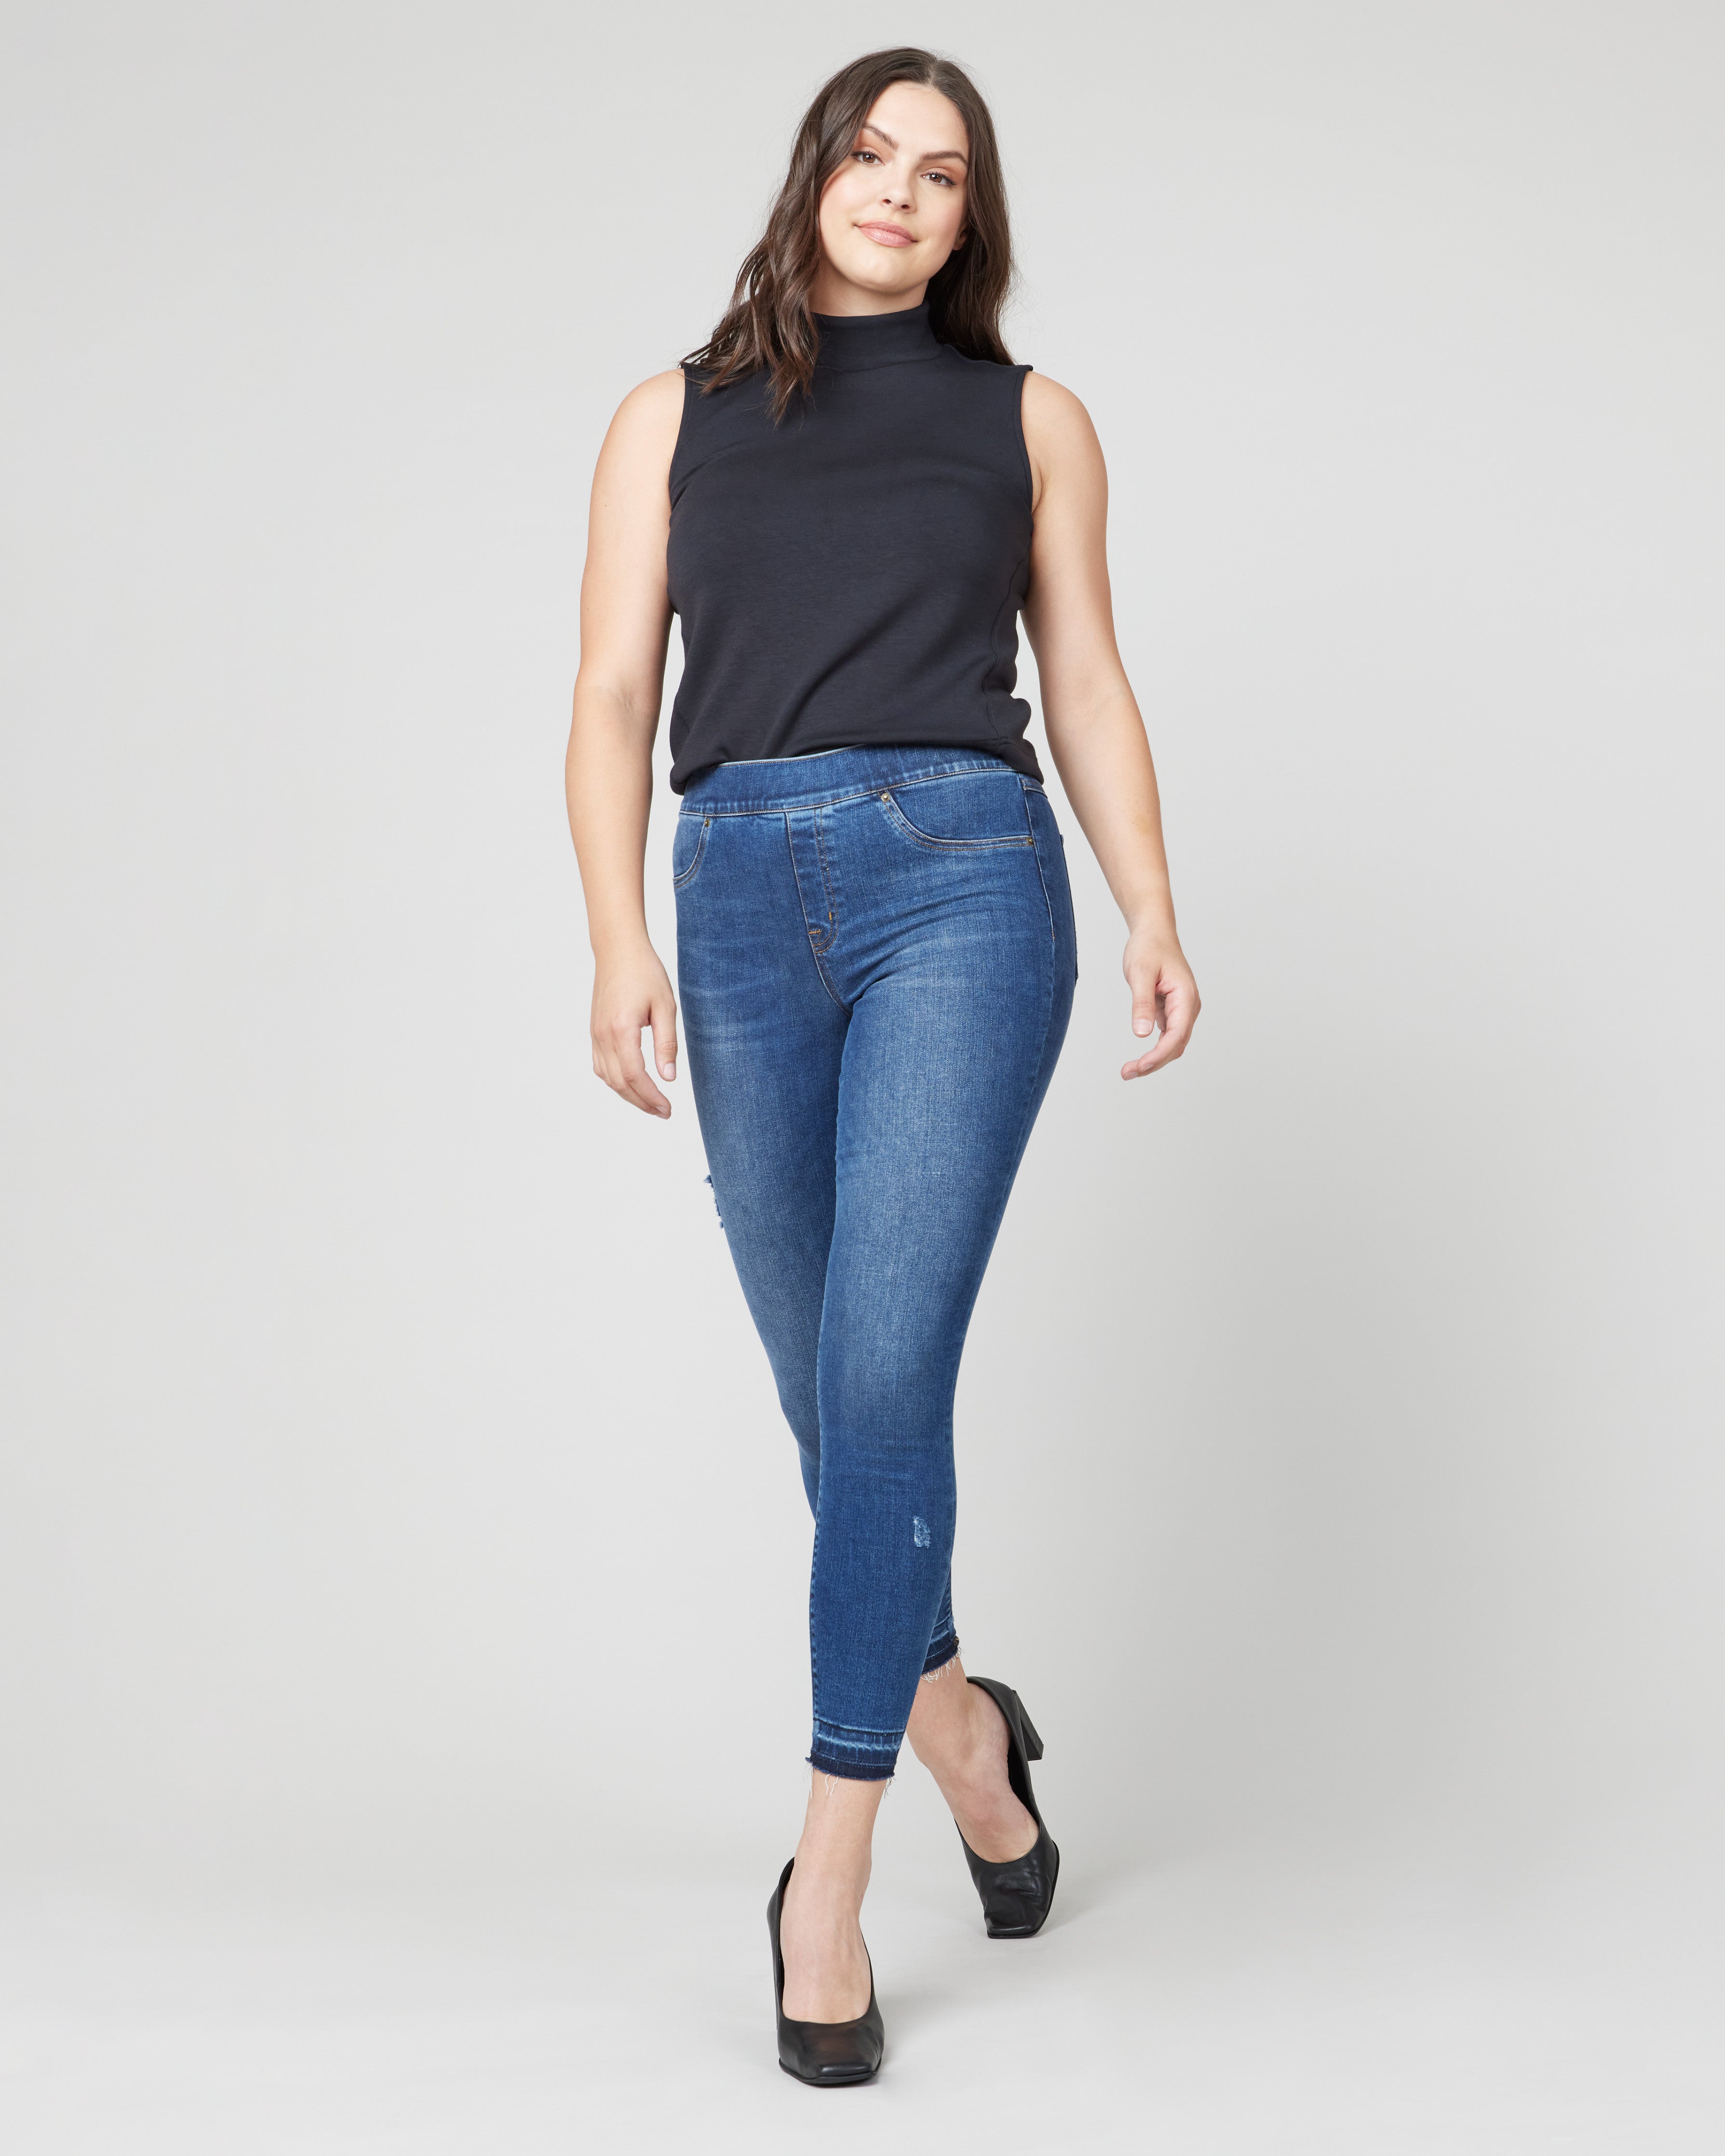 White Spanx Jeans for Women